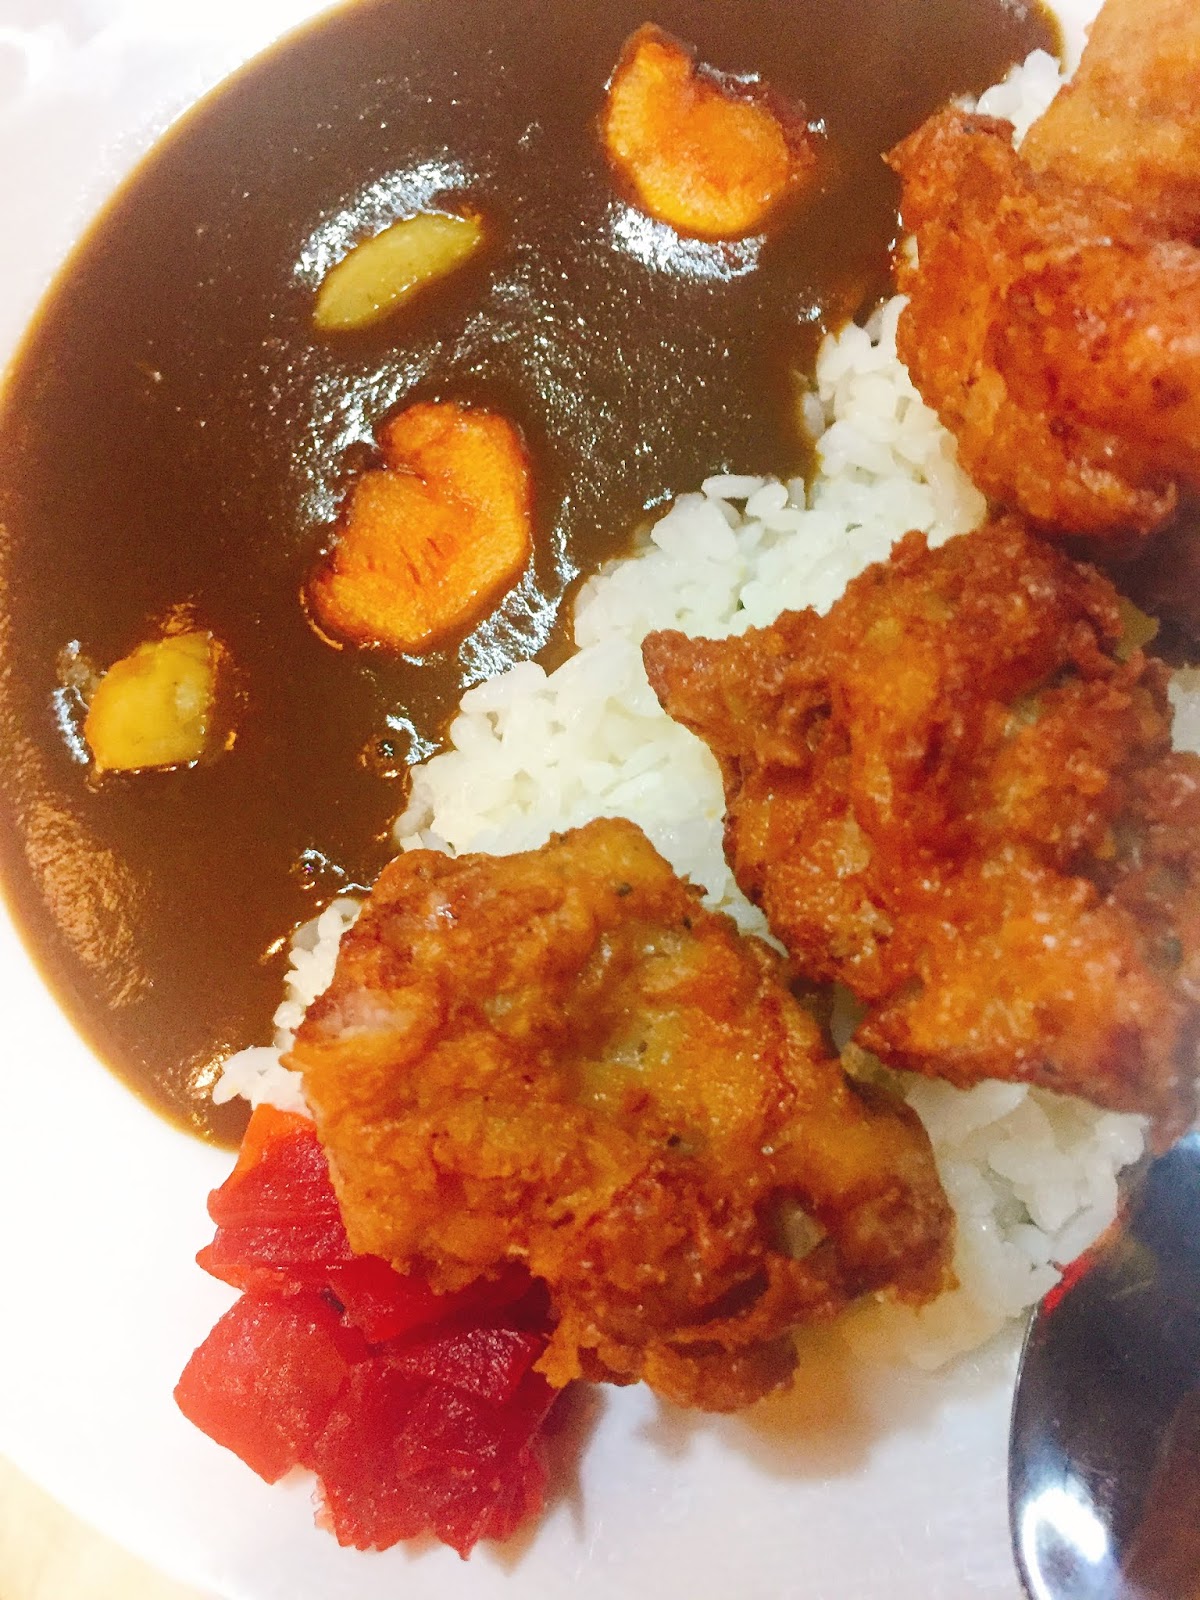 Curry%2Bwith%2Bchicken%2B%25282%2529.JPG